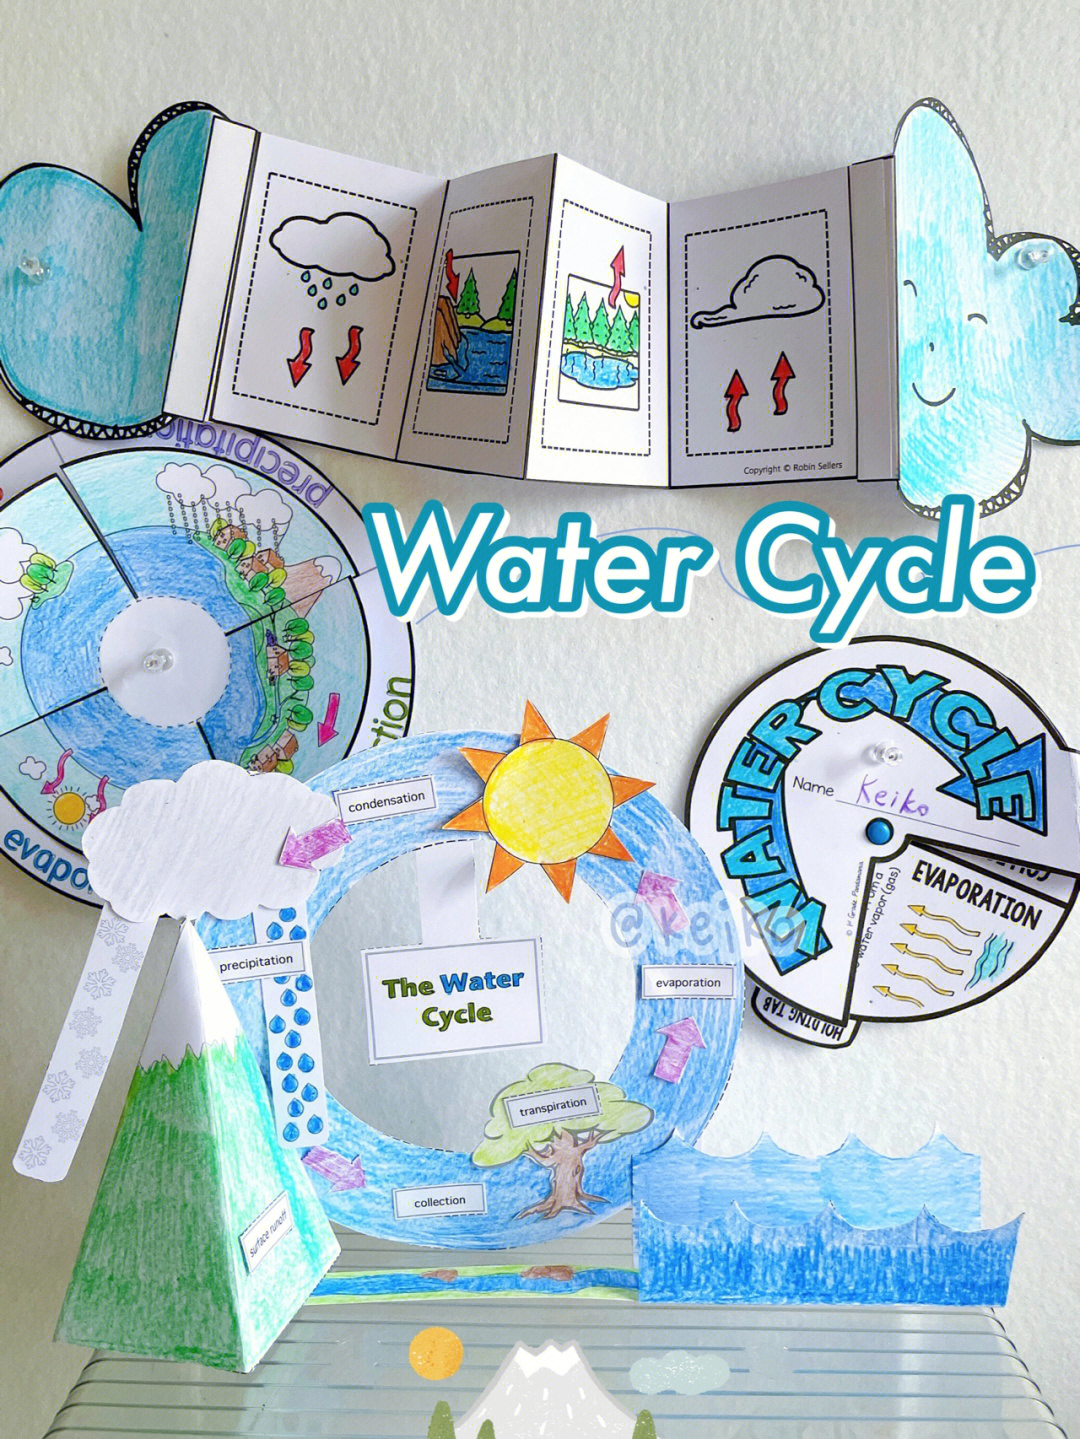 watercyclesong图片